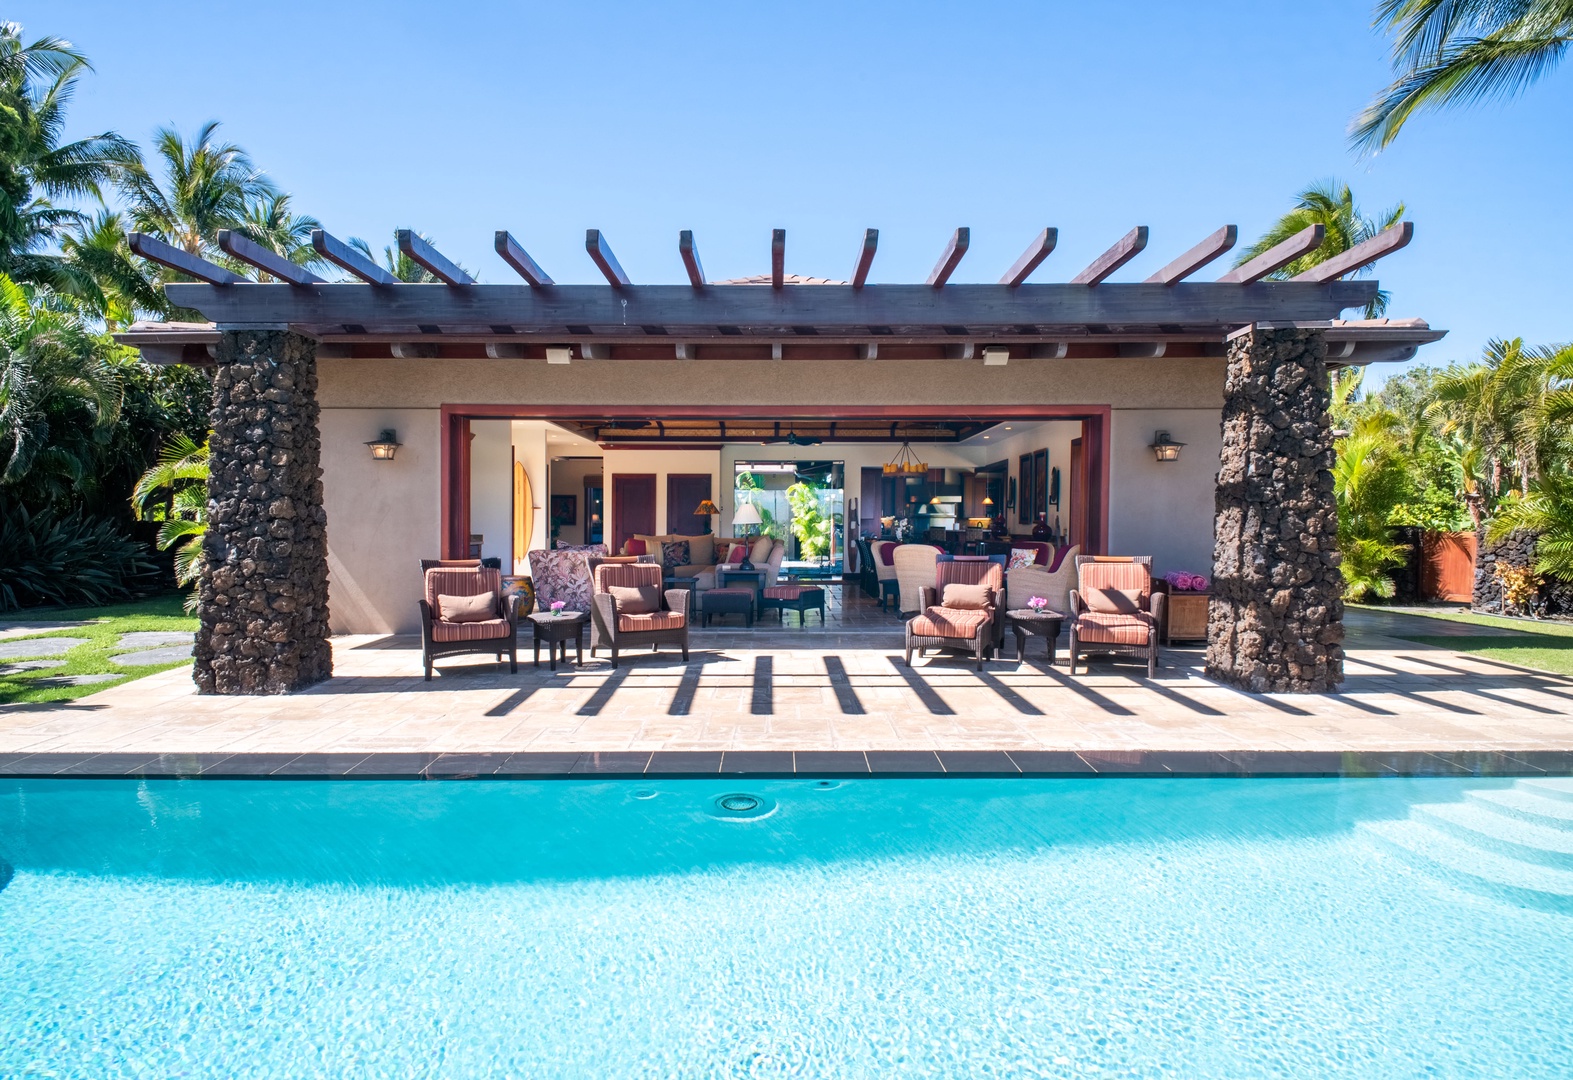 Kamuela Vacation Rentals, House of the Turtle at Champion Ridge, Mauna Lani (CR 18) - Featuring the spacious lanai in front of the heated pool.